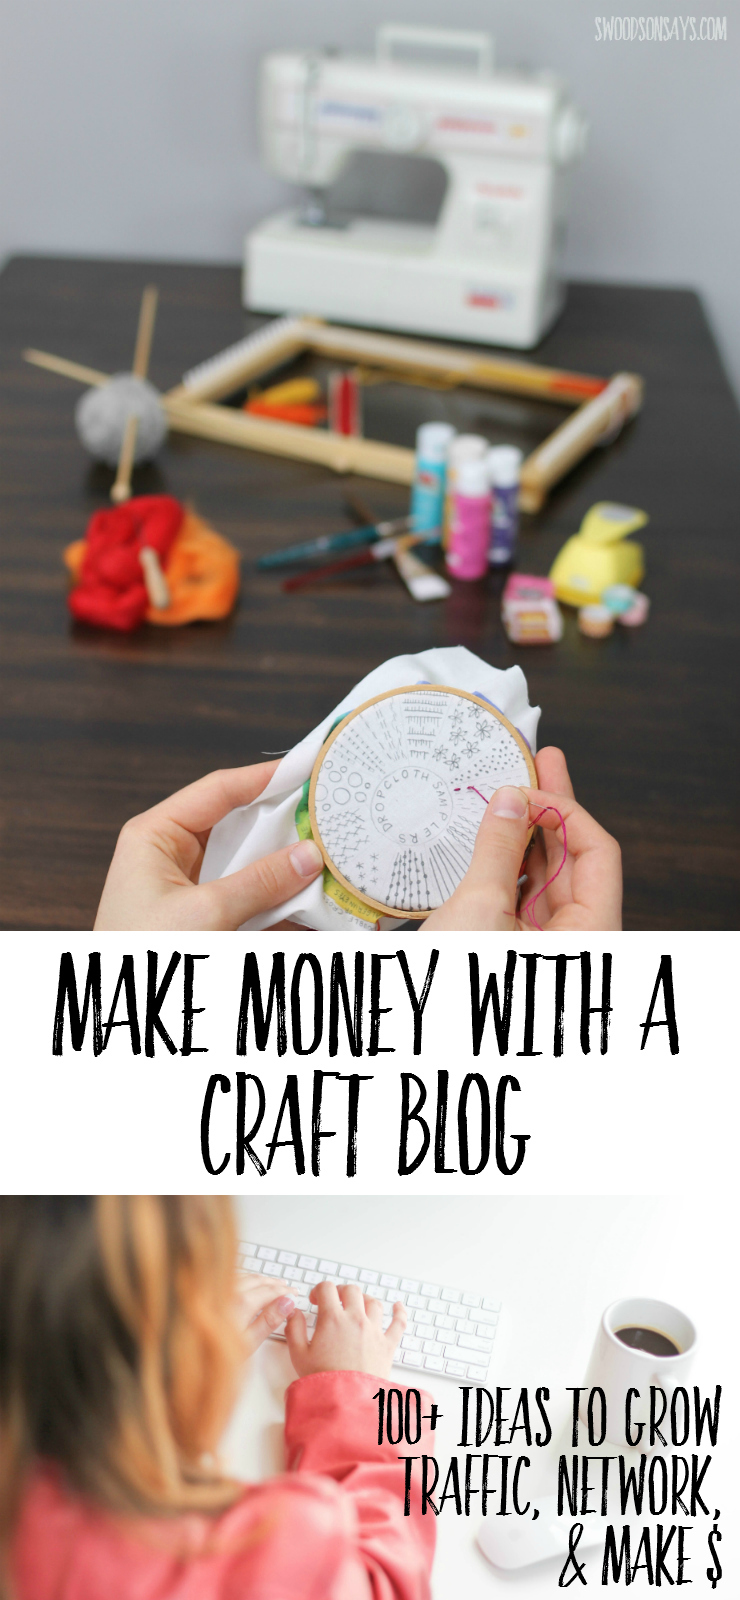 Ideas for how to make money, network, and grow your following as a craft or sewing blogger. A long list of affiliate programs for craft blogs, affiliate programs for sewing blogs, and networking groups!